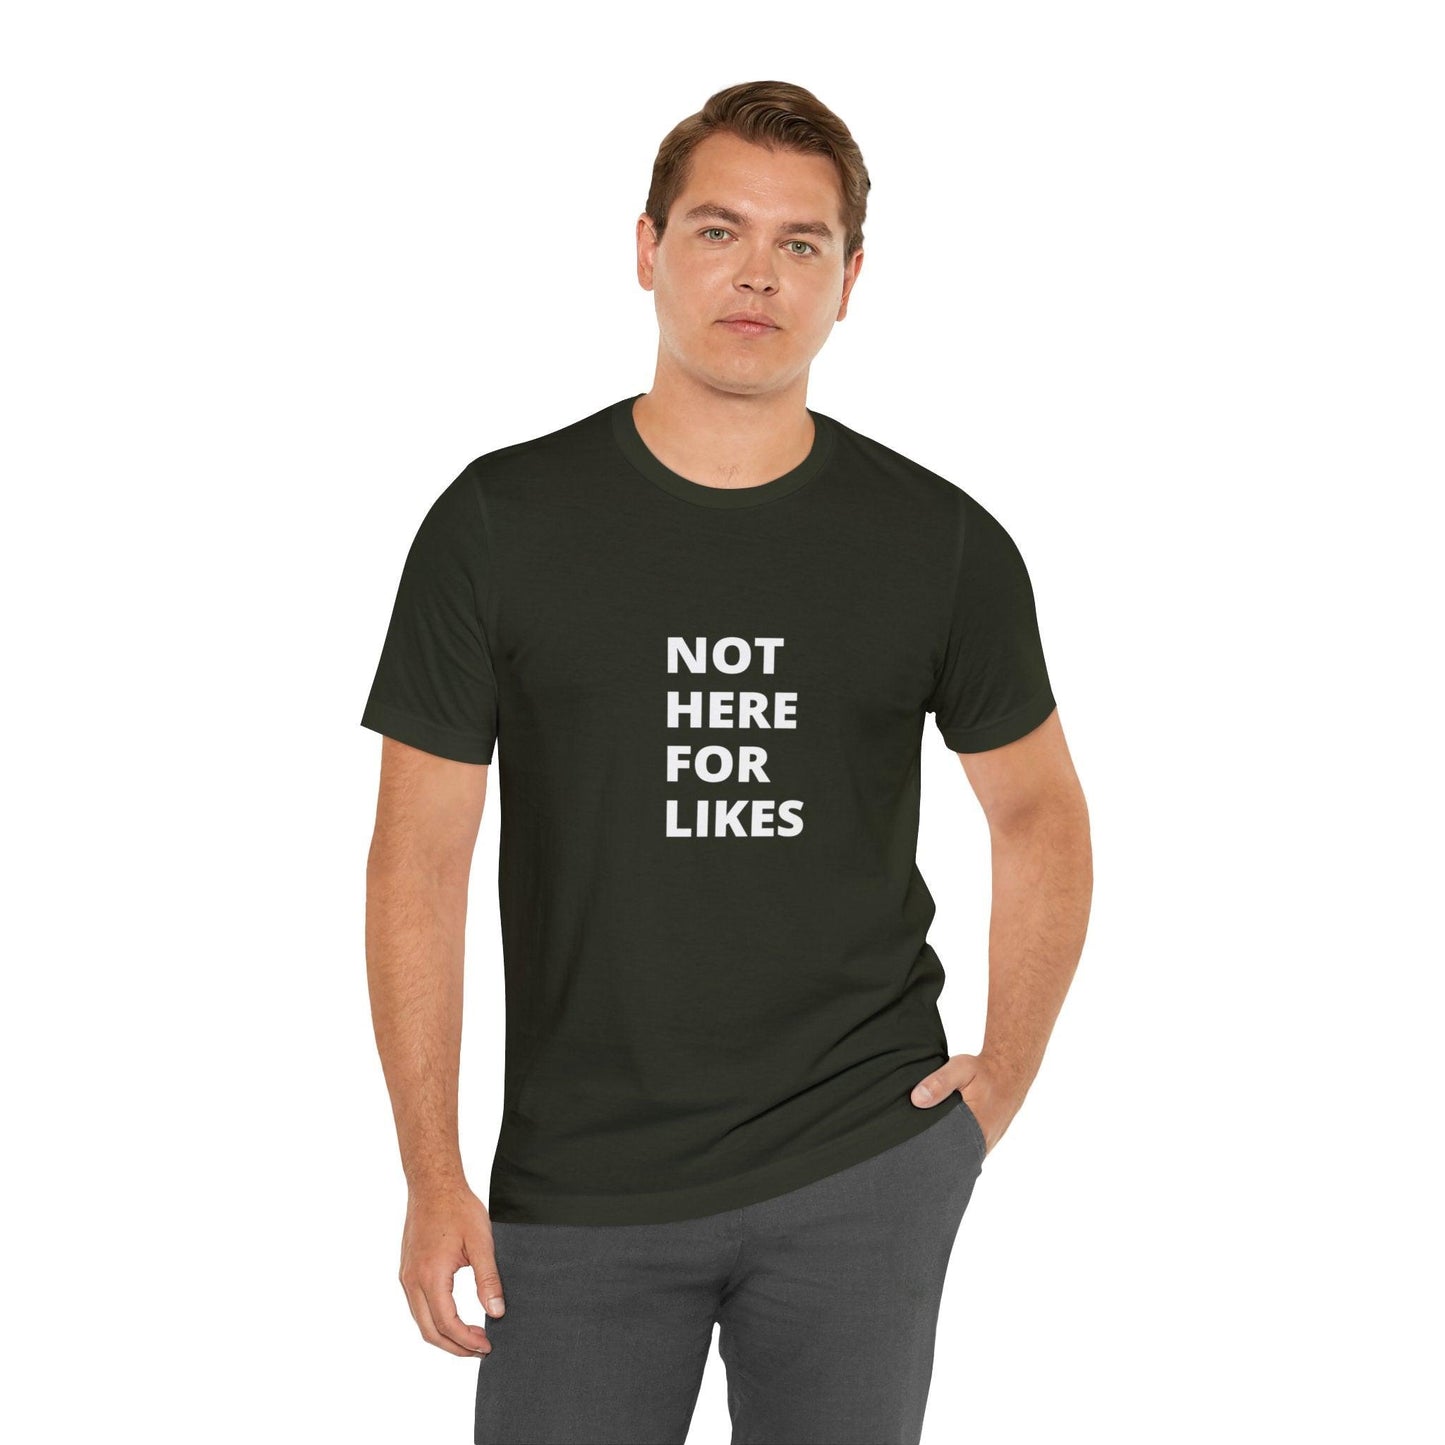 Not Here for Likes Tee - LQ Boutique